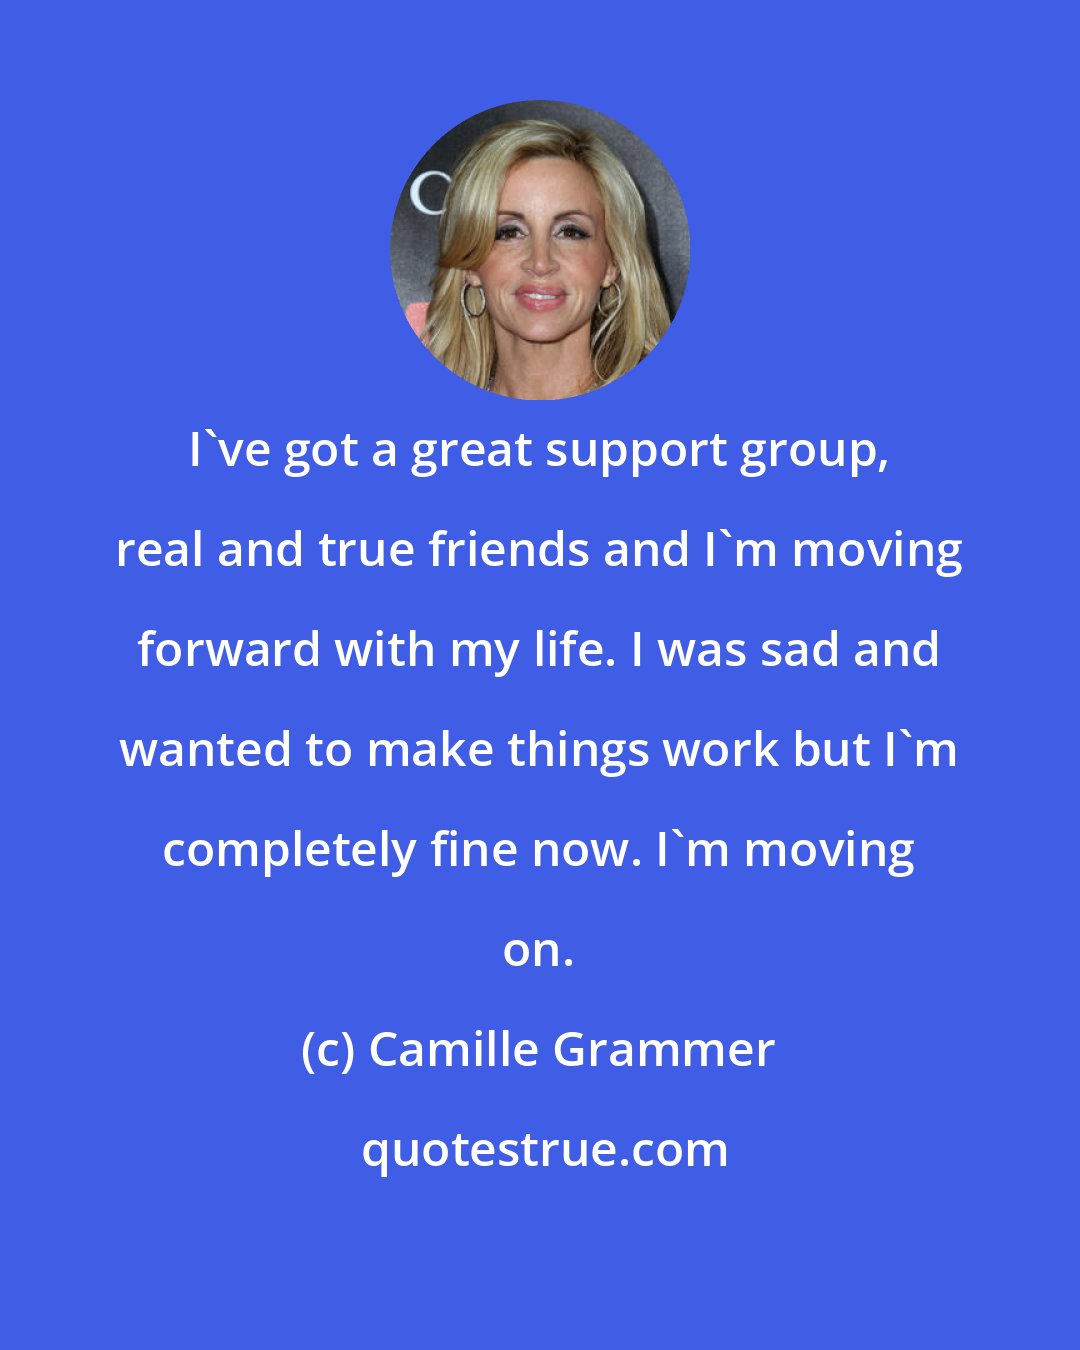 Camille Grammer: I've got a great support group, real and true friends and I'm moving forward with my life. I was sad and wanted to make things work but I'm completely fine now. I'm moving on.